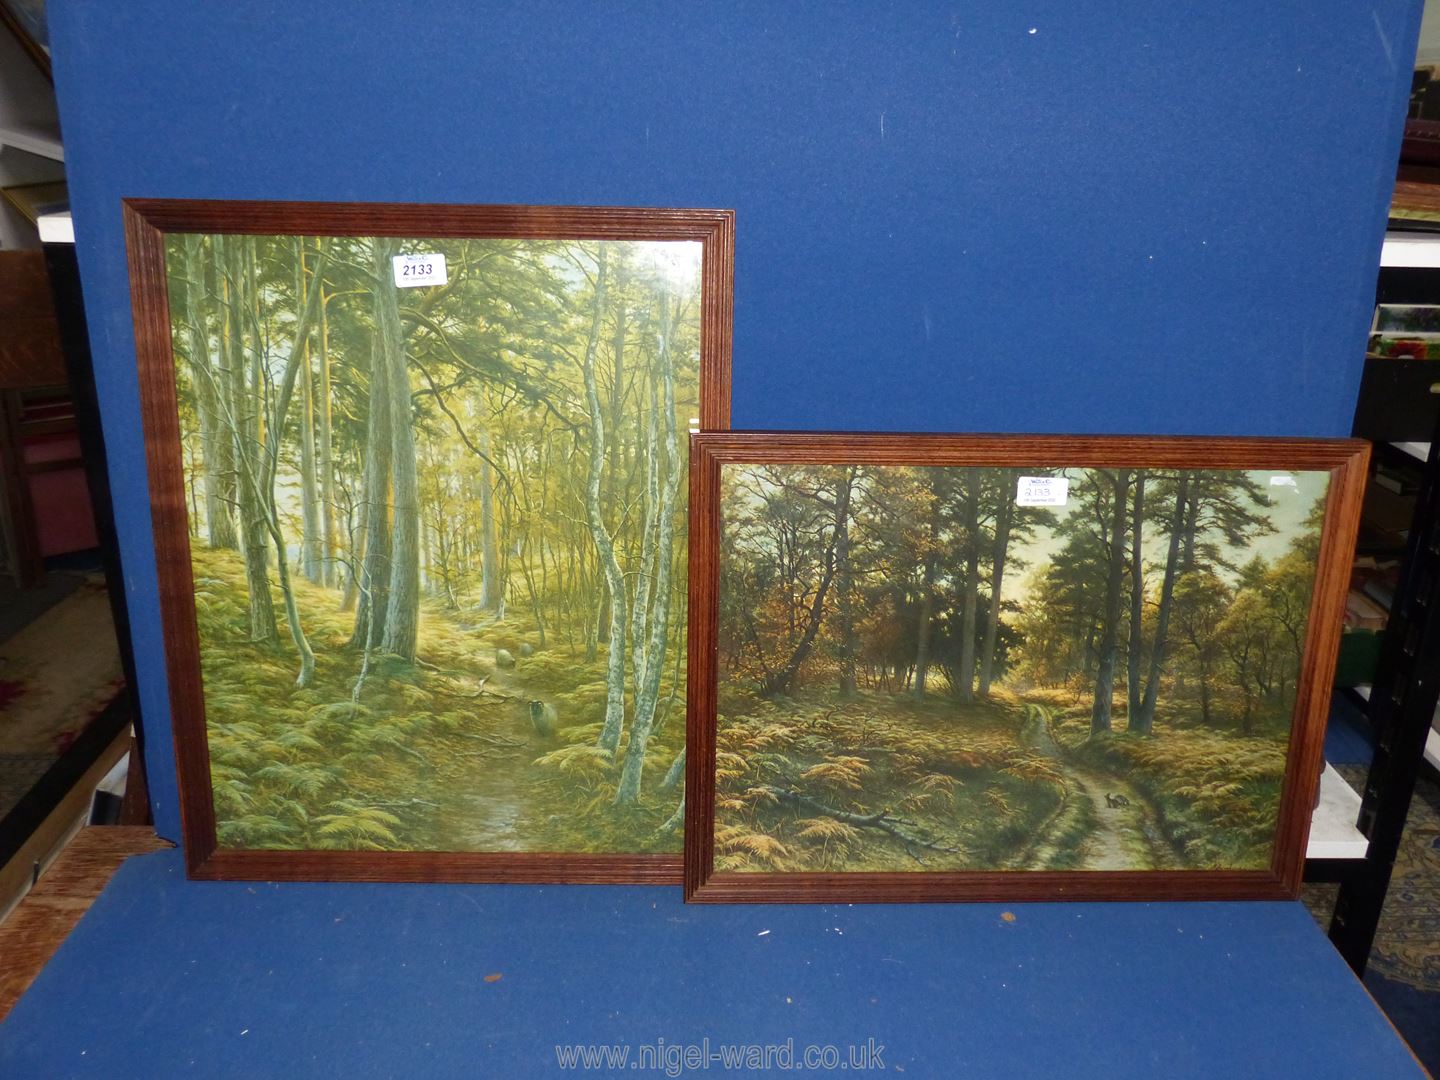 A pair of framed Prints of woodland scenes by Joseph Farquharson R.A.